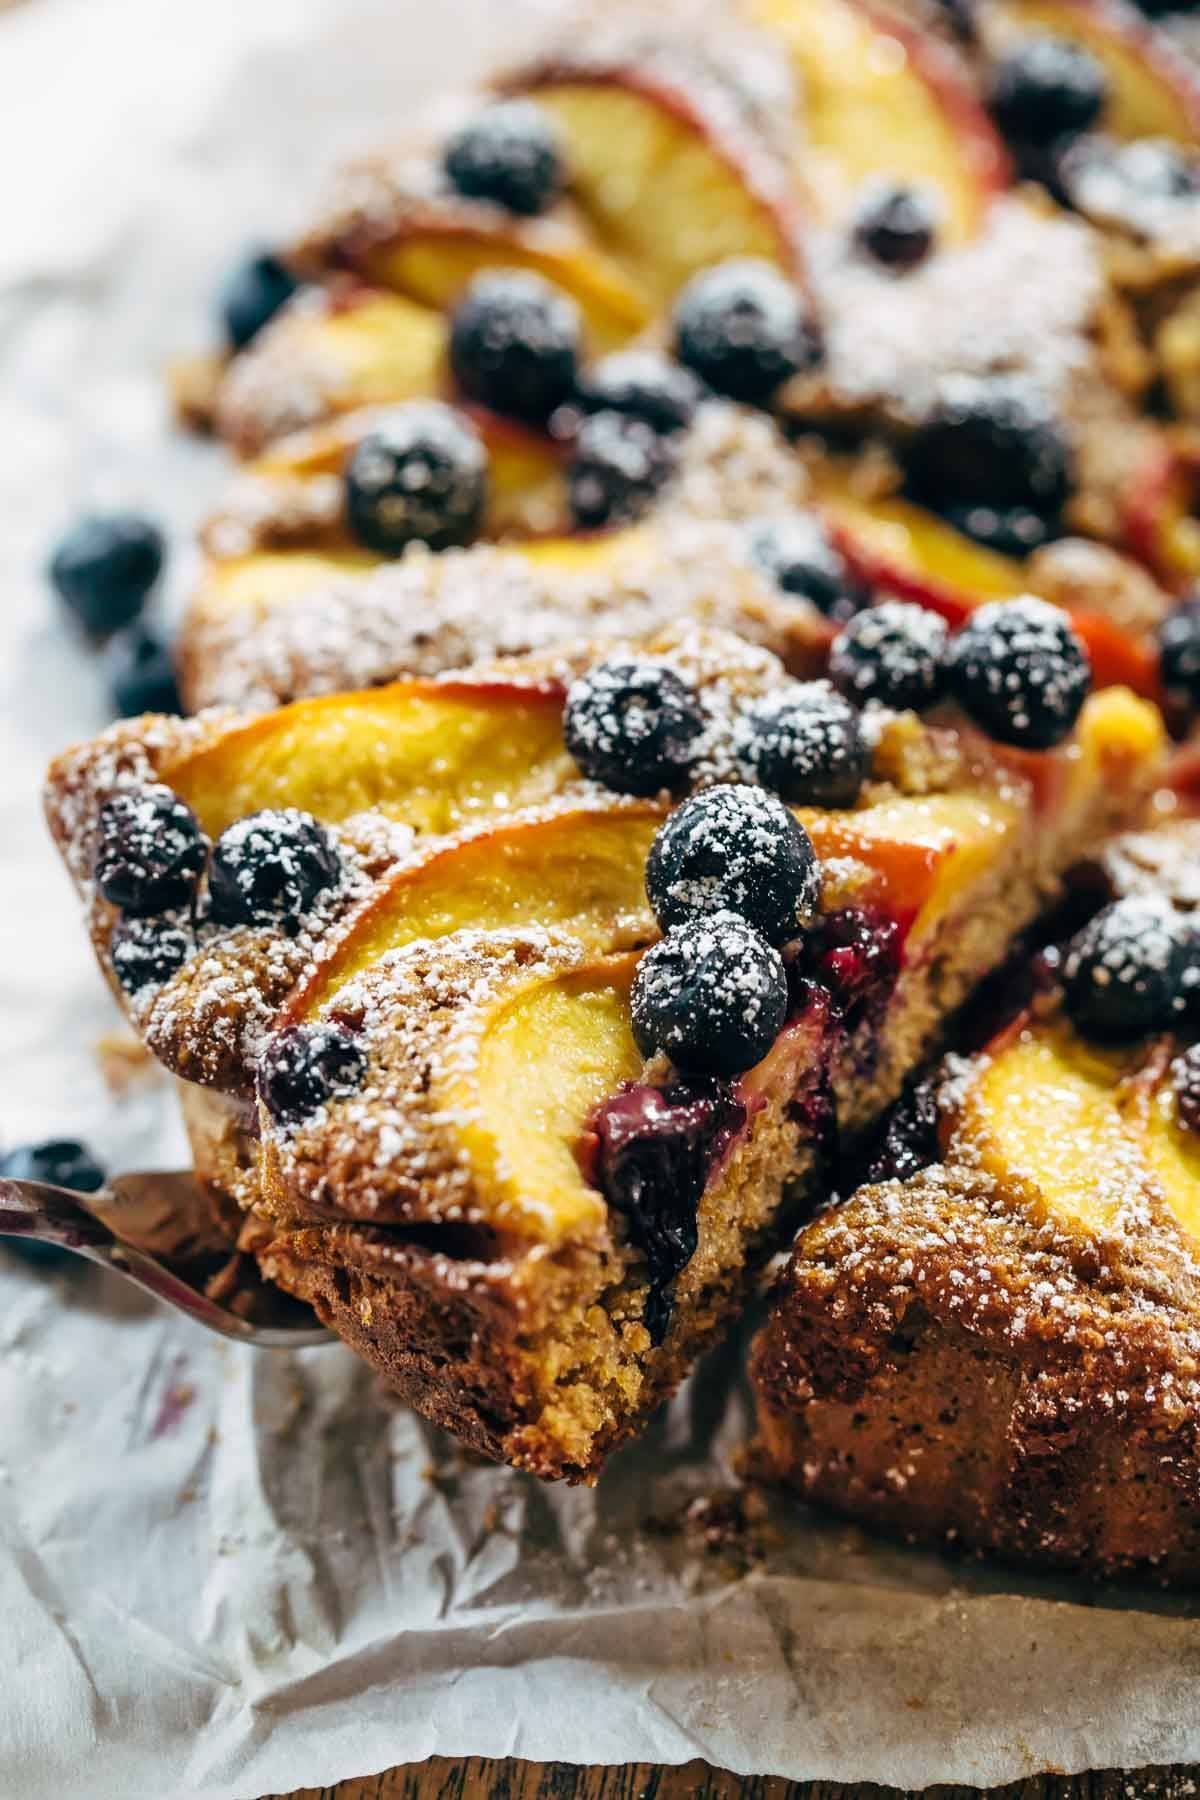 Fresh Blueberry Peach Cake with blueberries and coconut sugar spread over it.